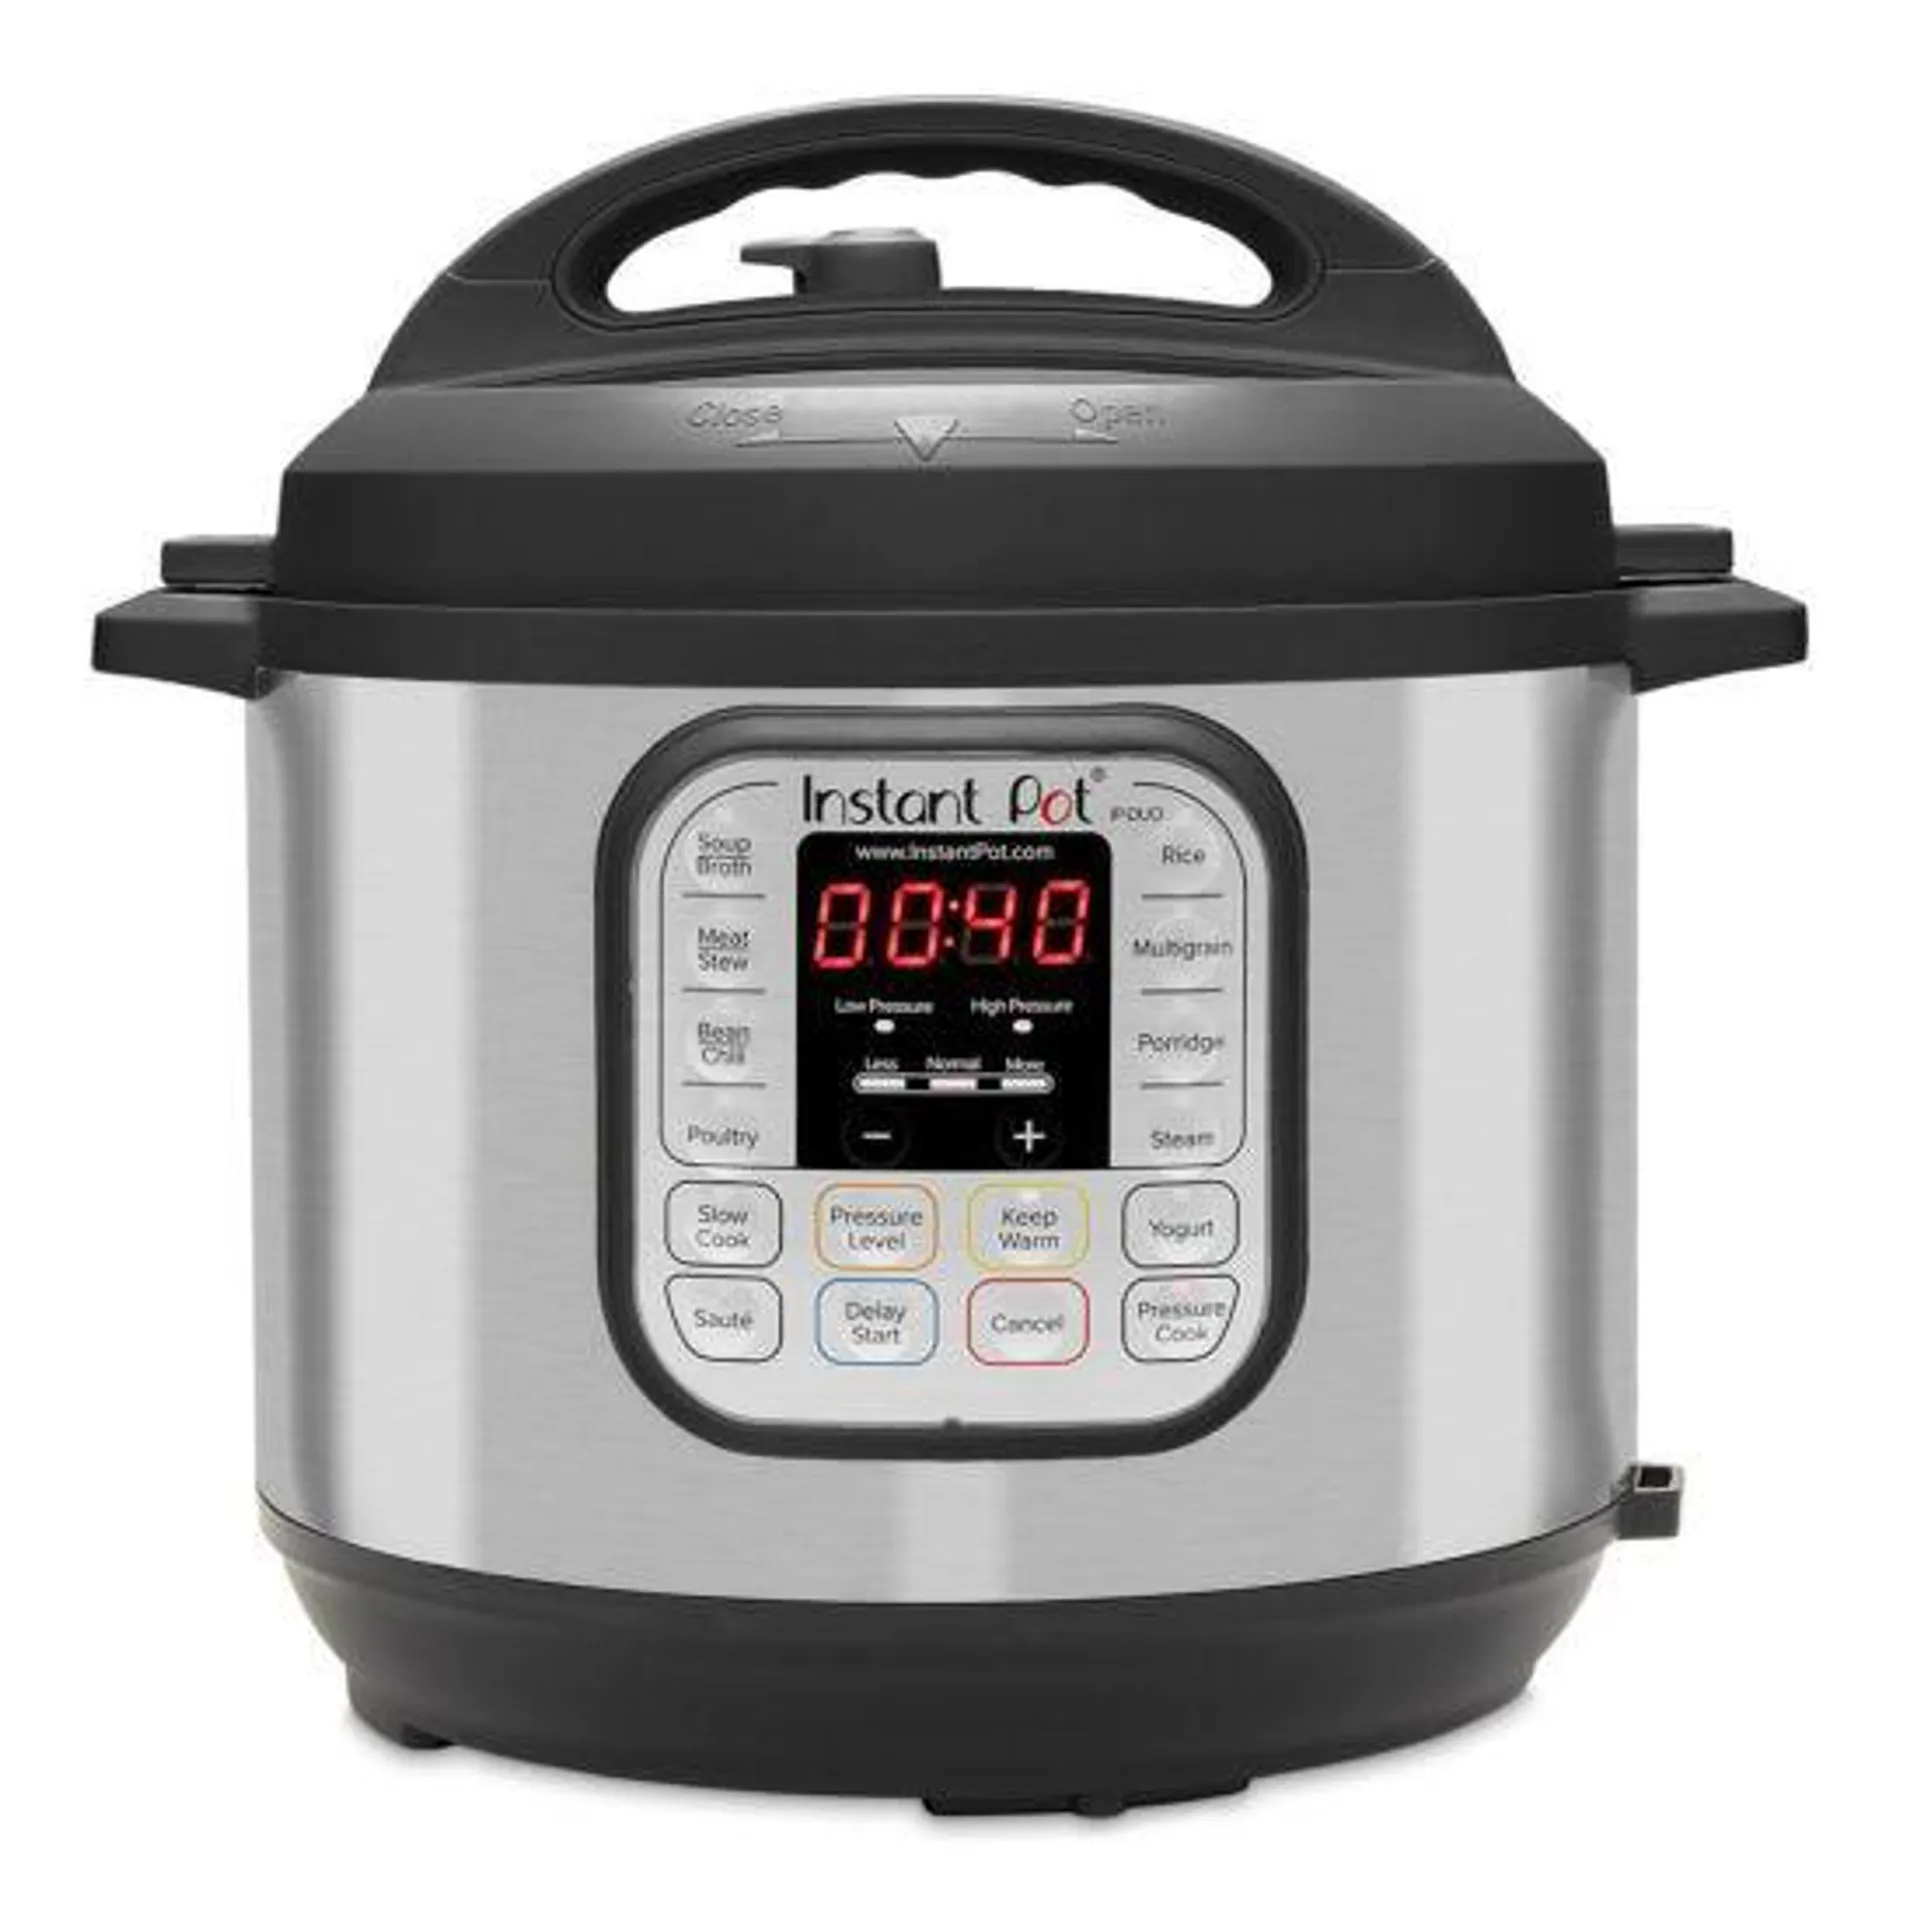 Instant Pot 60 Duo 7-in-1 Smart 5.7L Programmable Multi Cooker - Stainless Steel